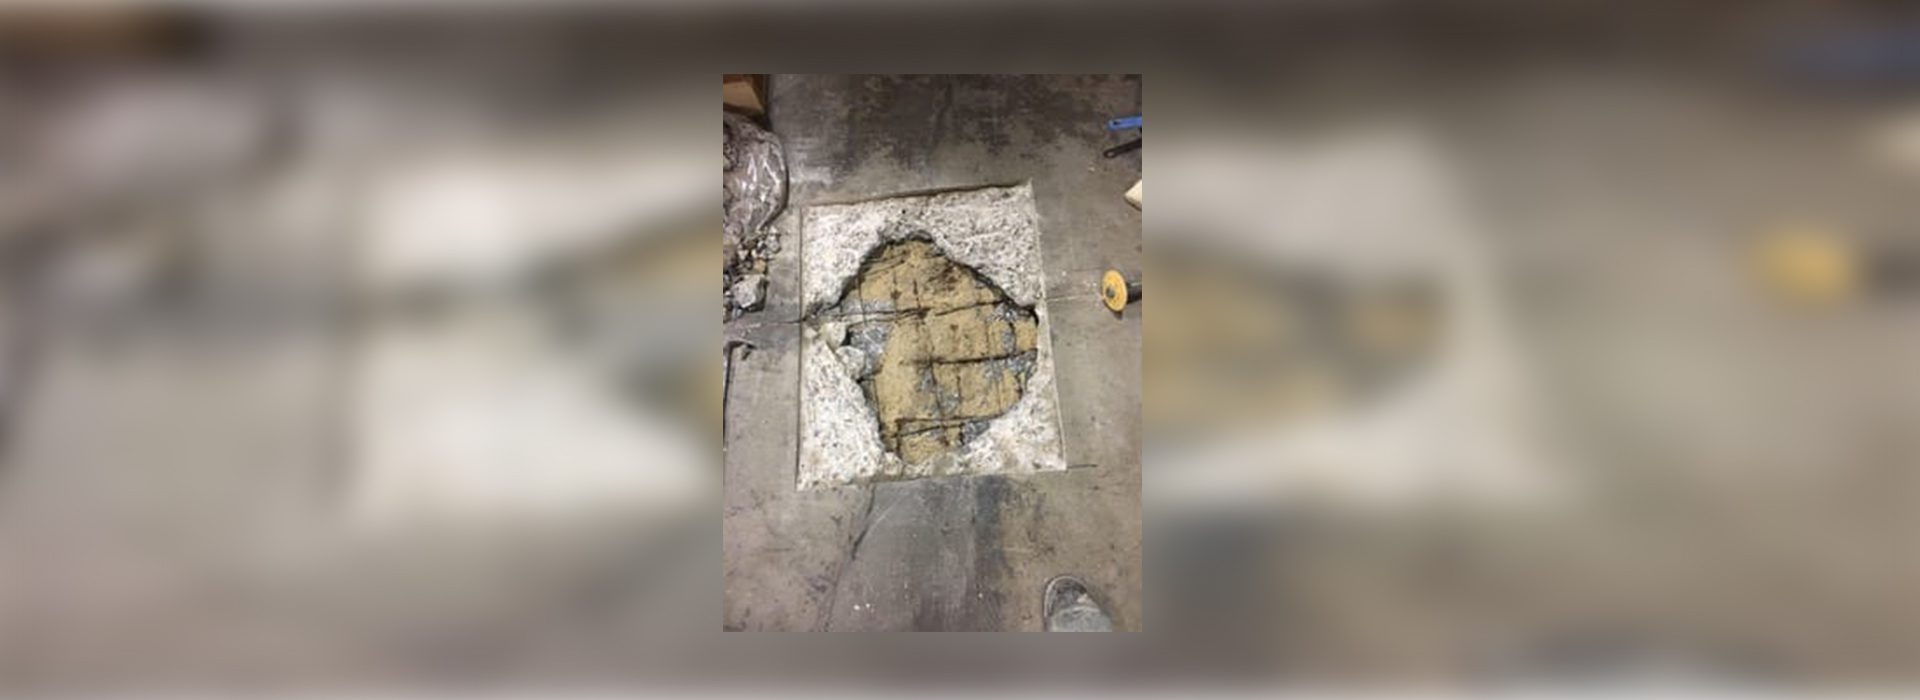 A hole in the floor of an unfinished building.